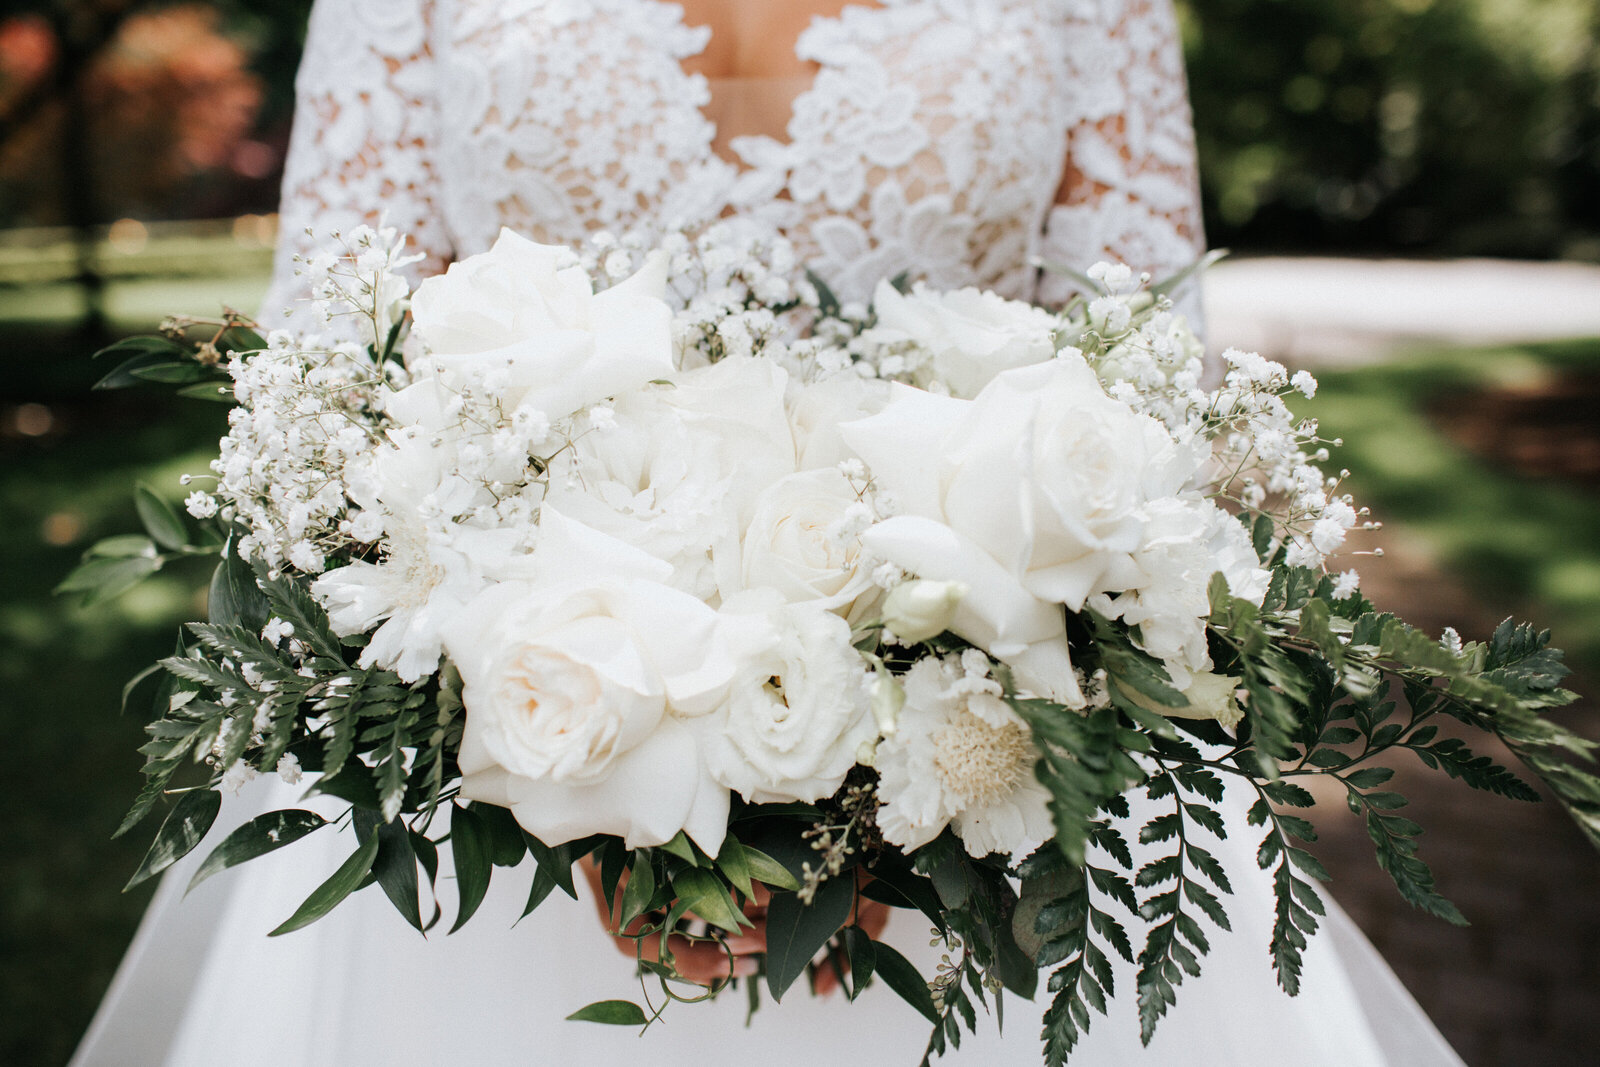 Bridal bouquet with white roses, white lisianthus, baby's breath, fern and ruscus.